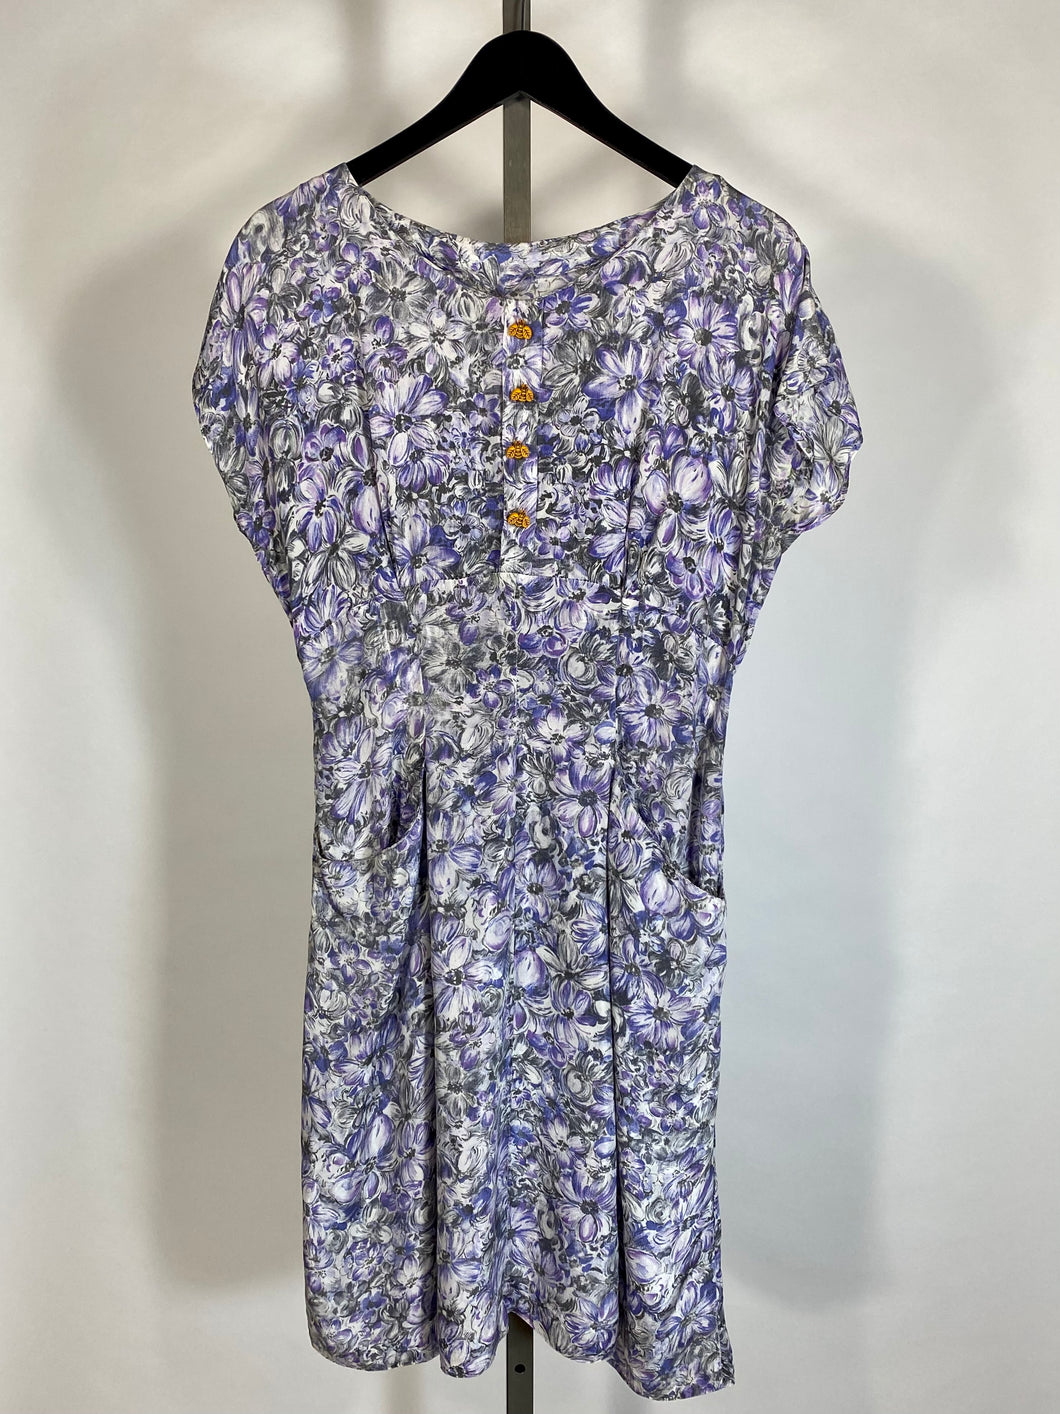 1940’s-50’s purple floral semi sheer dress with yellow bee buttons detail